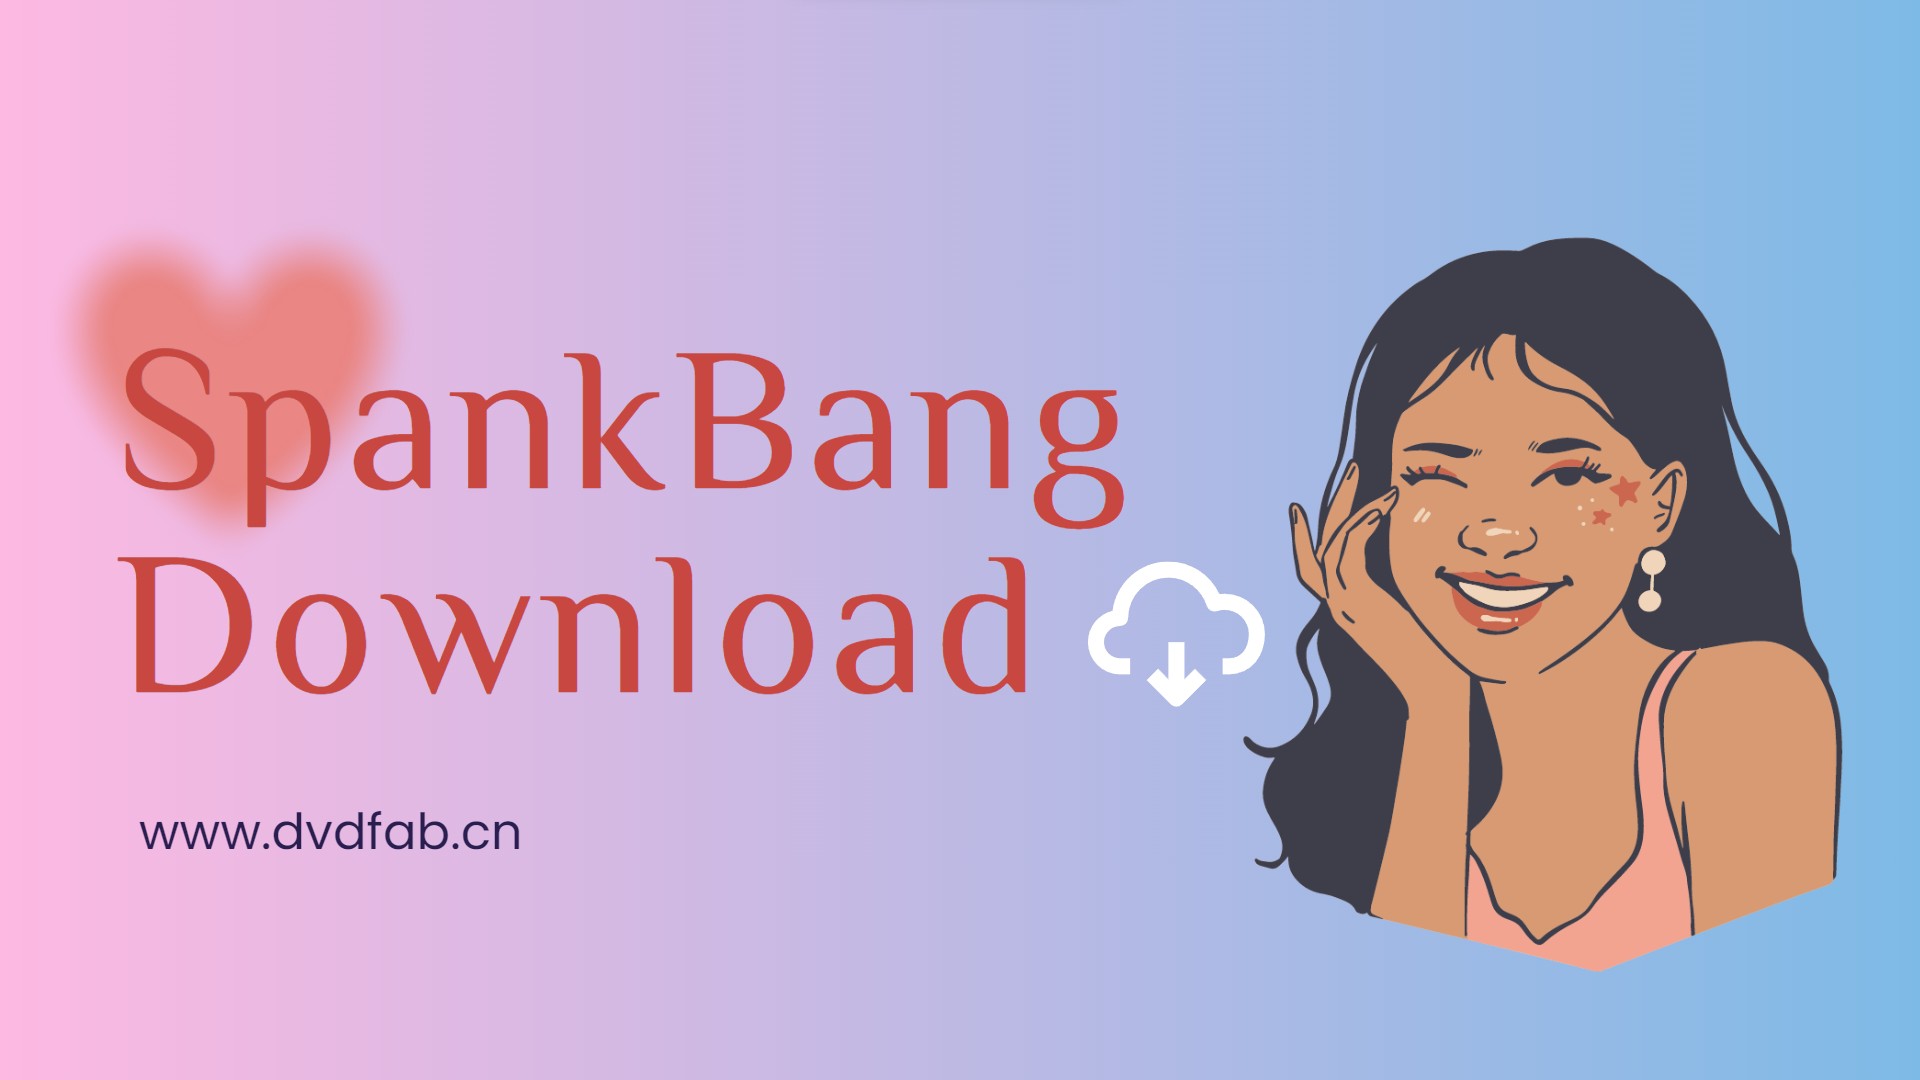 How to Download SpankBang - 5 Best Ways to Download SpankBang to MP4